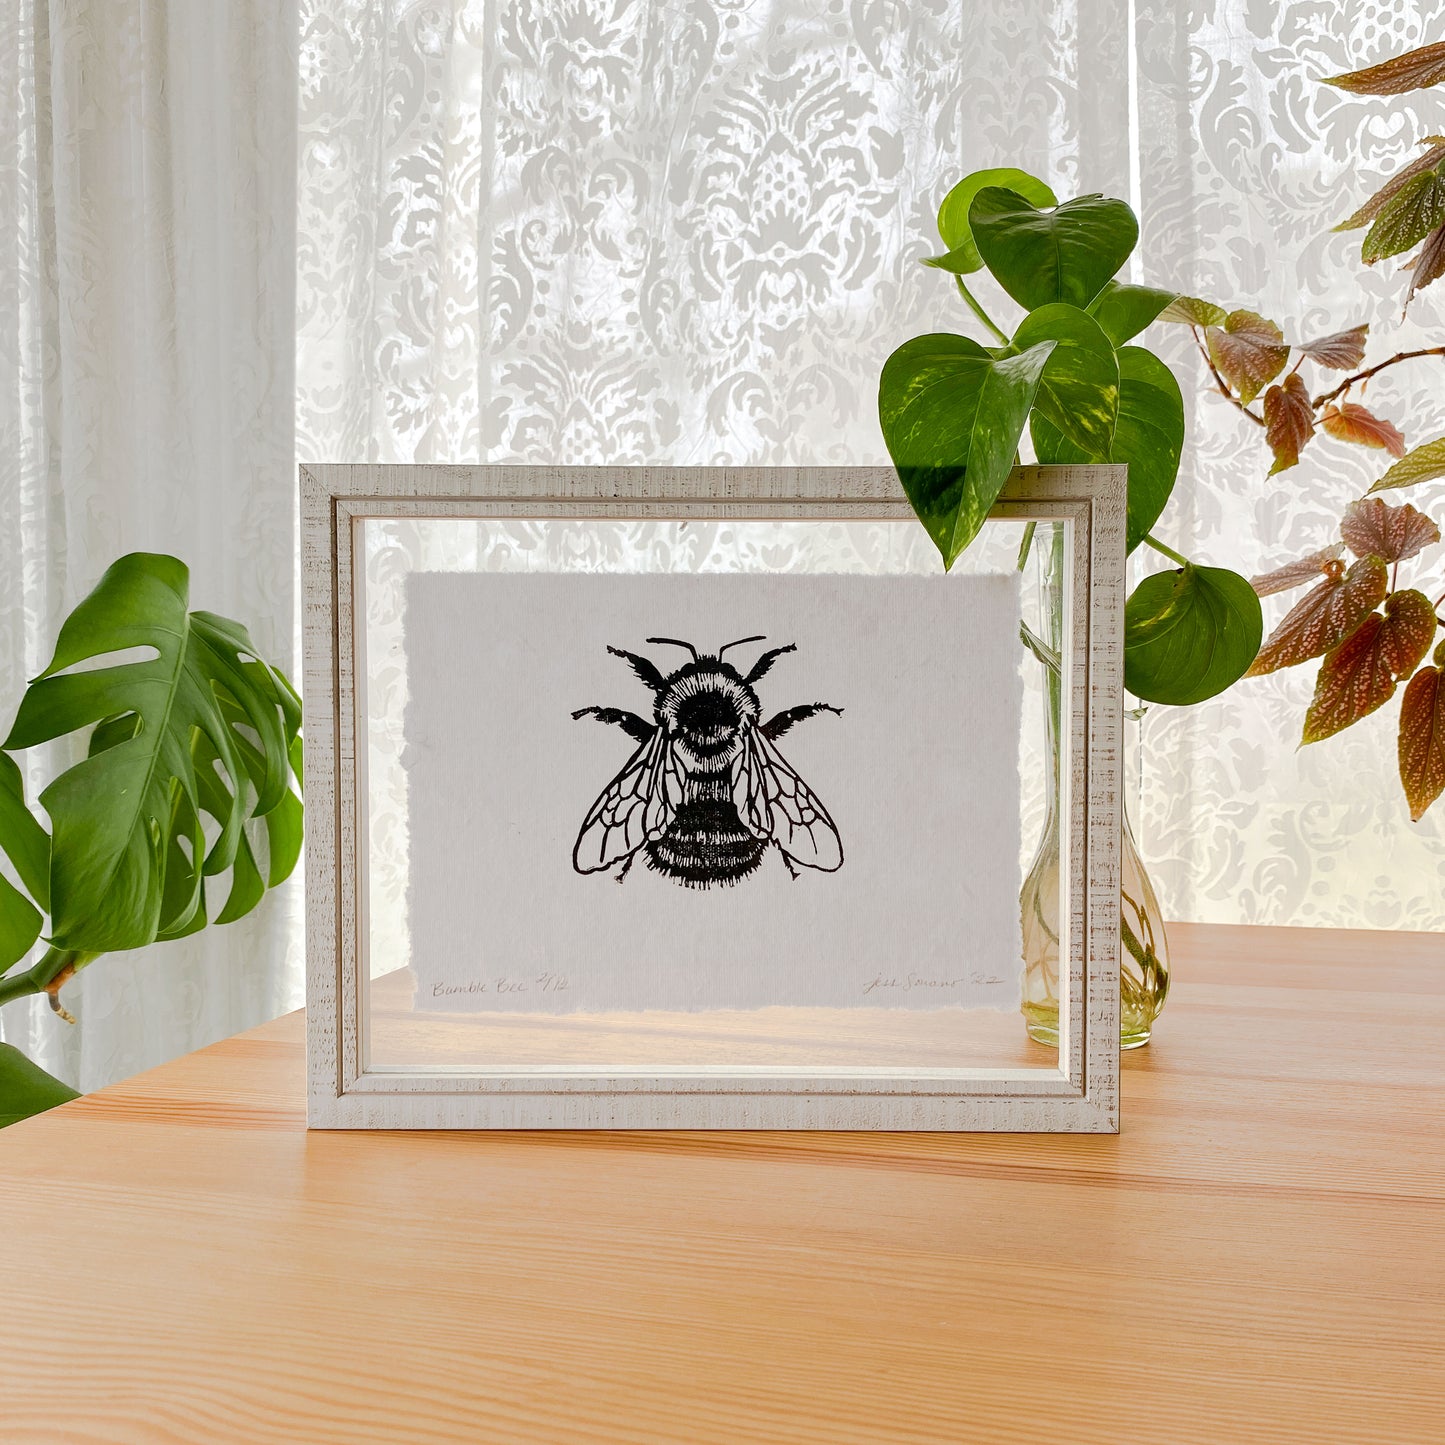 Framed Bumble Bee Linocut Relief Print